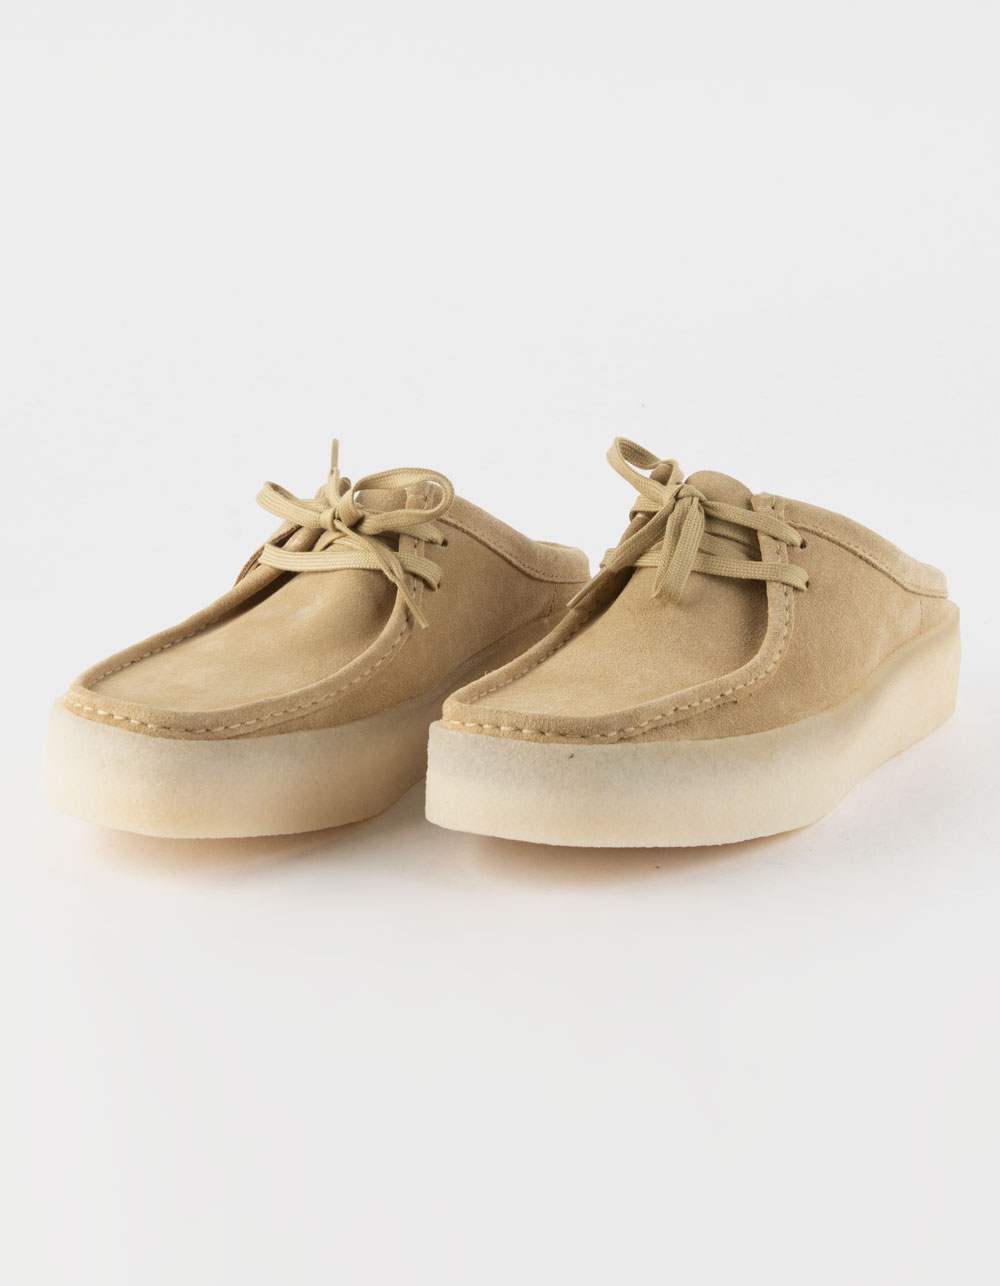 boom Luksus Knogle CLARKS Wallabee Cup Lo Mens Shoes - TAN | Tillys